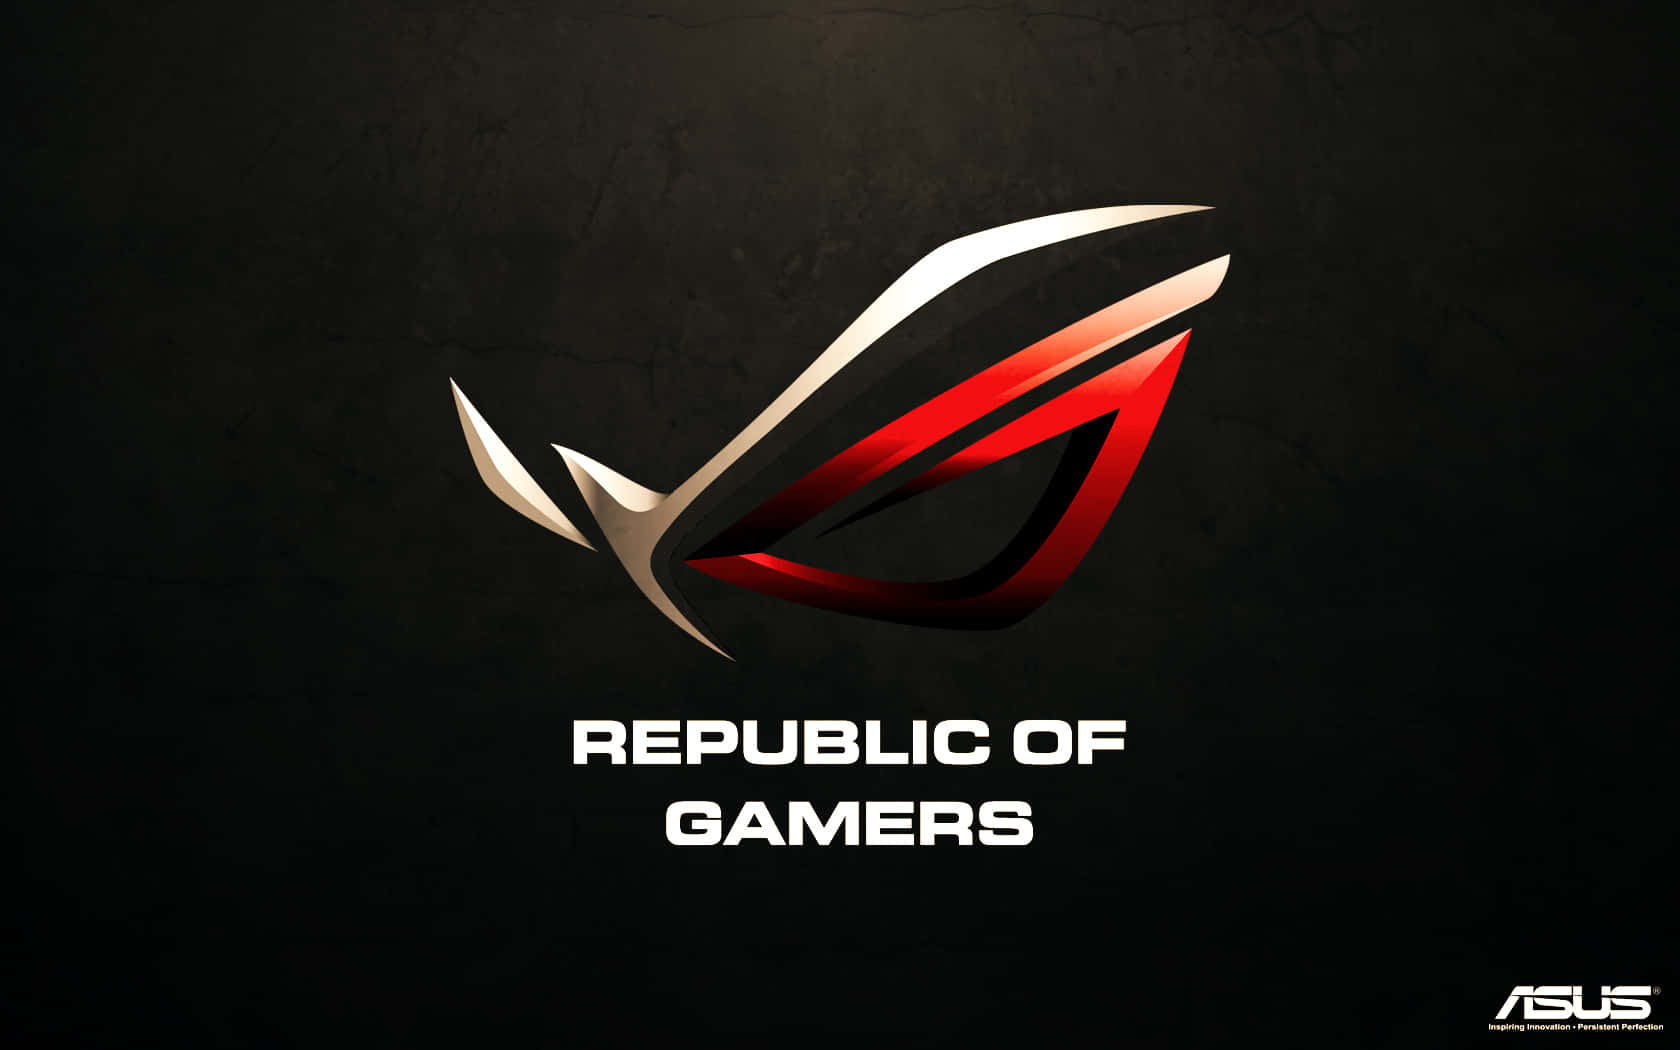 "Up Your Game With ROG's Top of The Line Components"